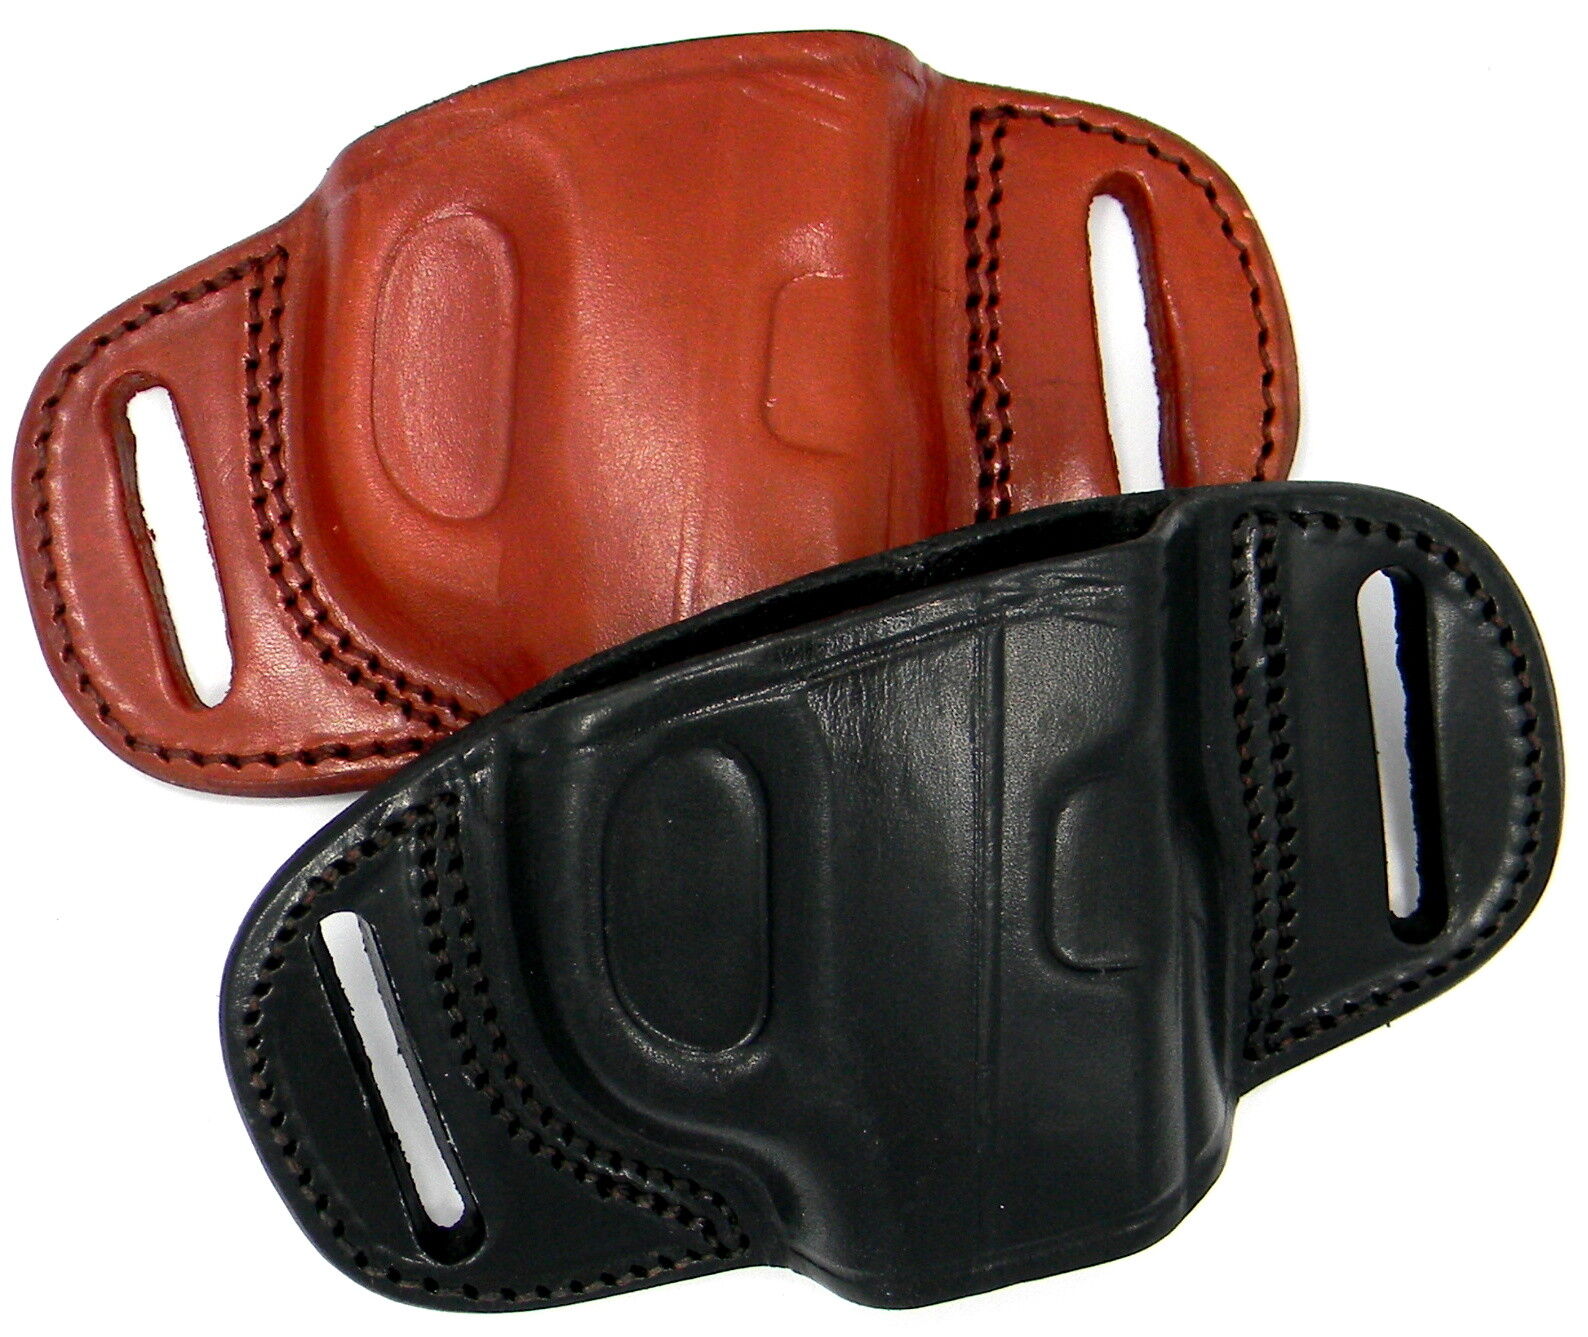 CLOSEOUT Right Hand Leather Quick Draw Belt Slide Holster - CHOOSE GUN